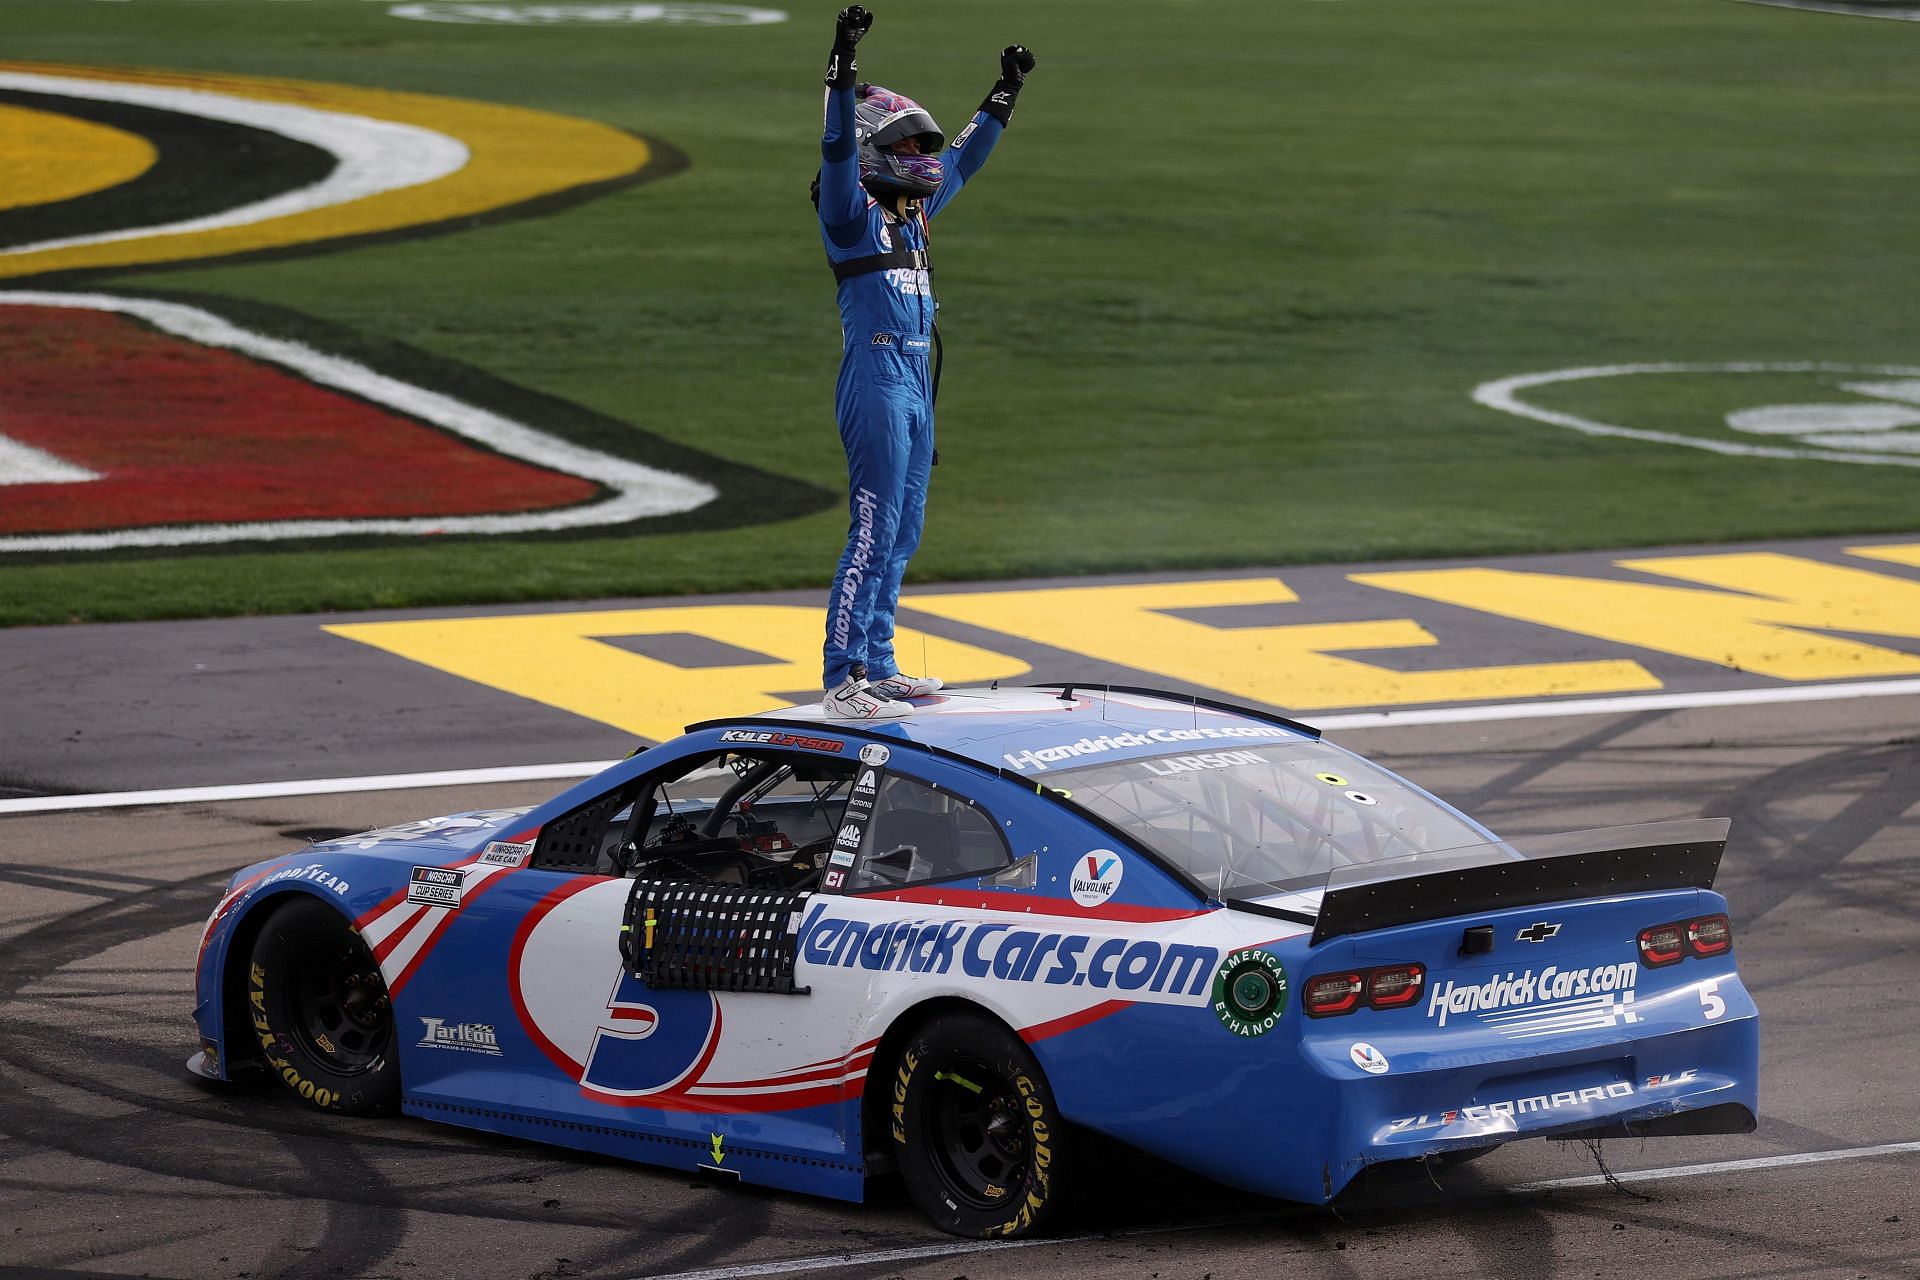 Larson celebrates a victory at the Pennzoil 400 presented by Jiffy Lube